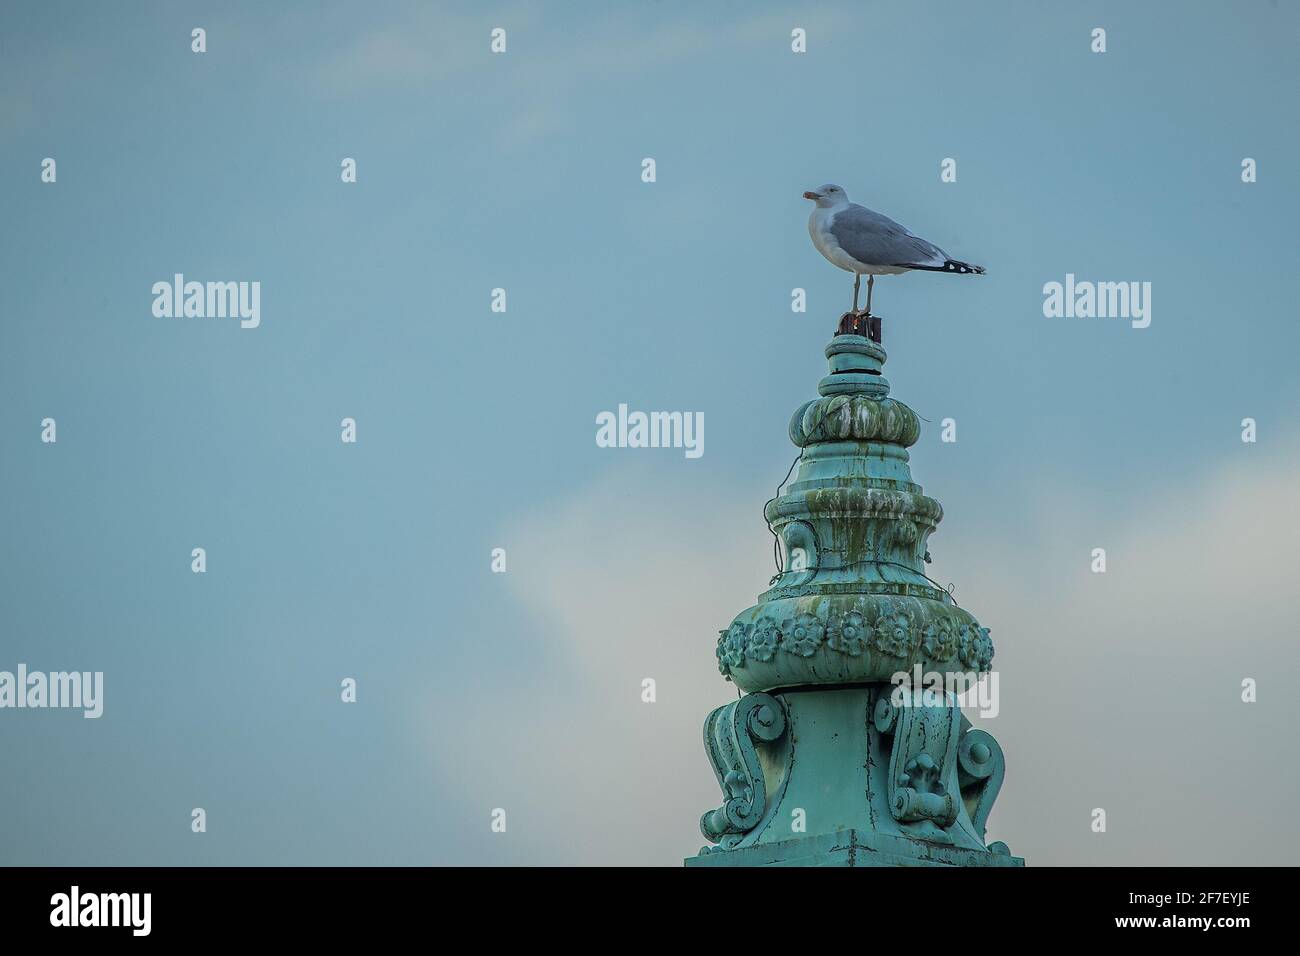 A white and gray seagull standing on top of the sharp green copper roof of an old vintage building or church on a cloudy sky background. Stock Photo